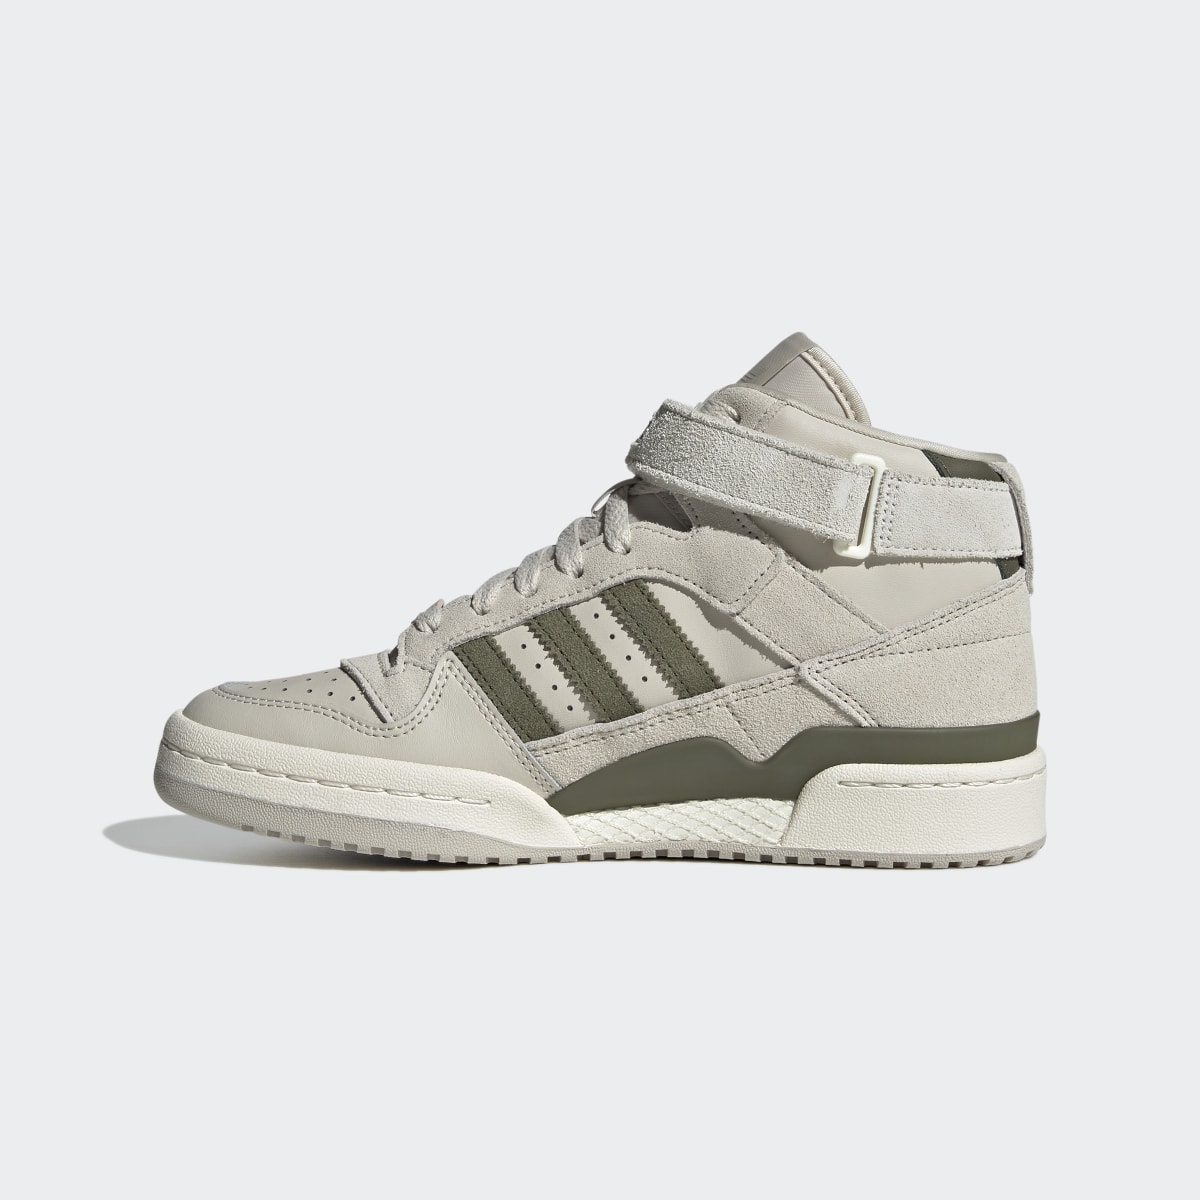 Adidas Forum Mid Shoes. 7